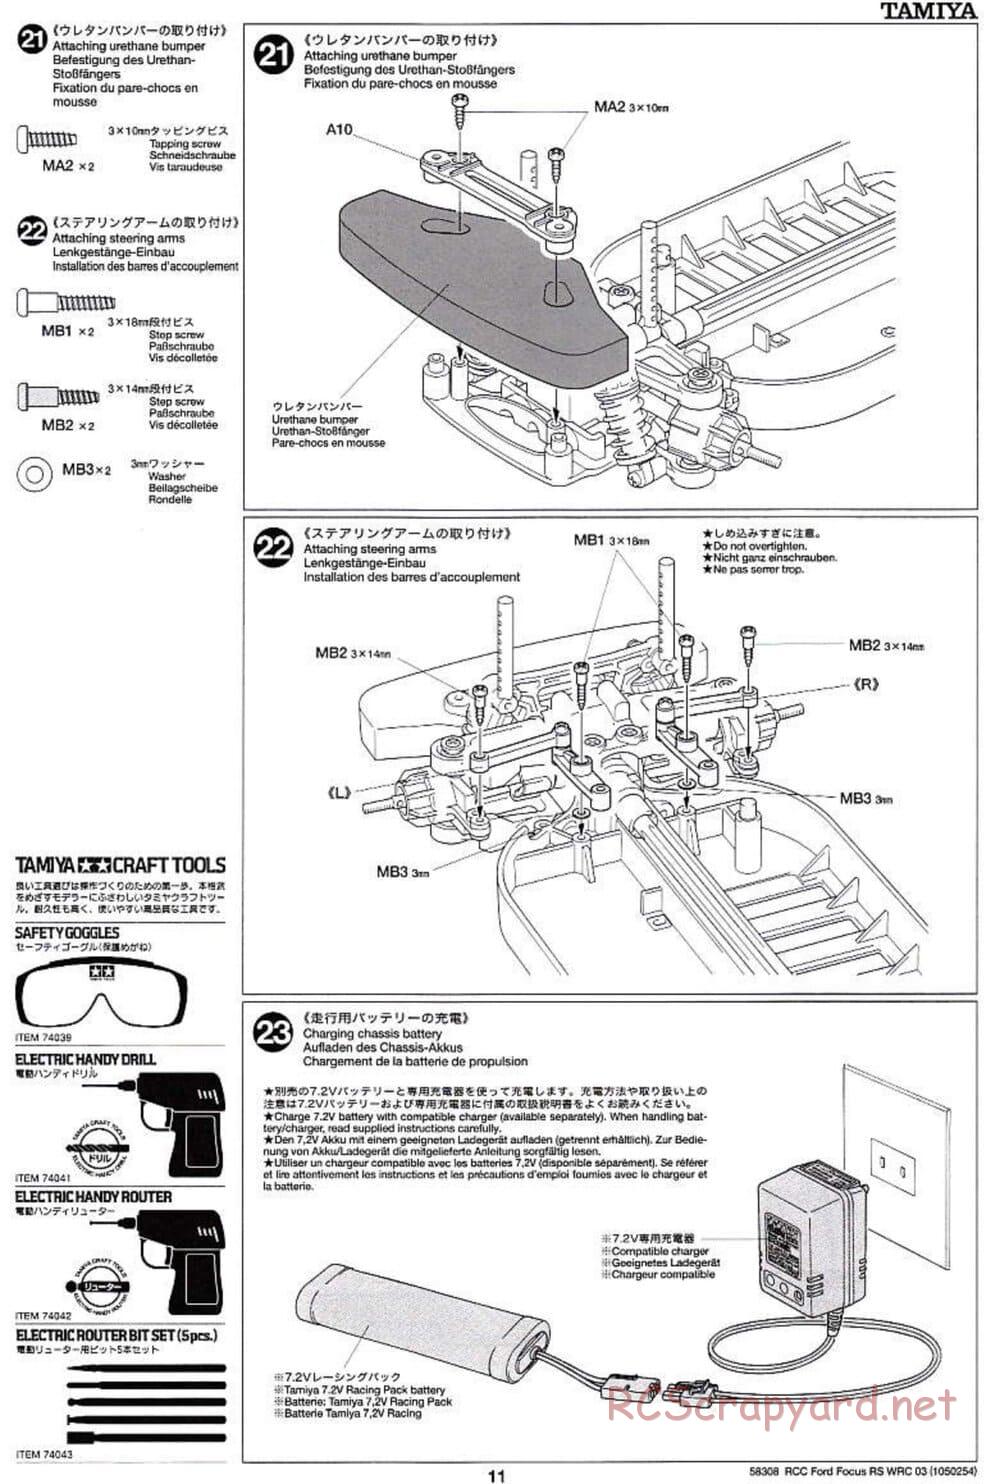 Tamiya - Ford Focus RS WRC 03 - TT-01 Chassis - Manual - Page 11